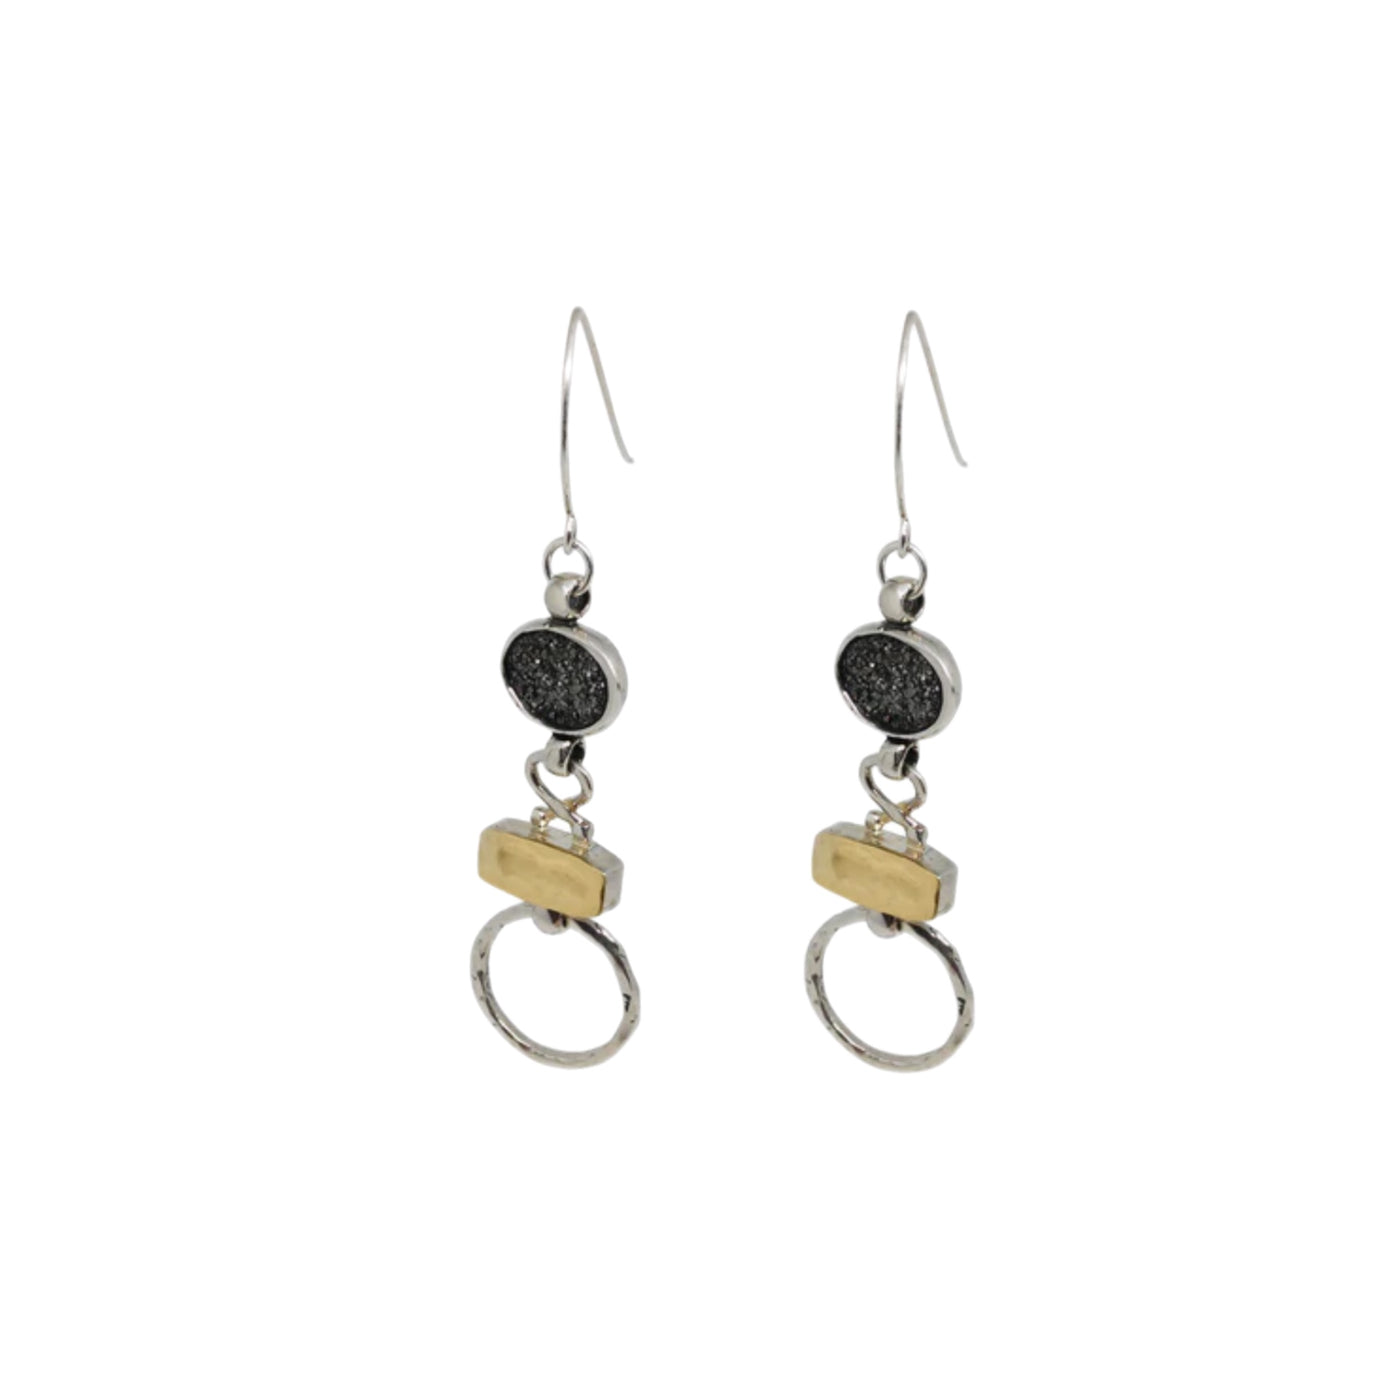 Sterling silver and 9ct yellow gold handcrafted Israeli drop earrings set with drusy gem